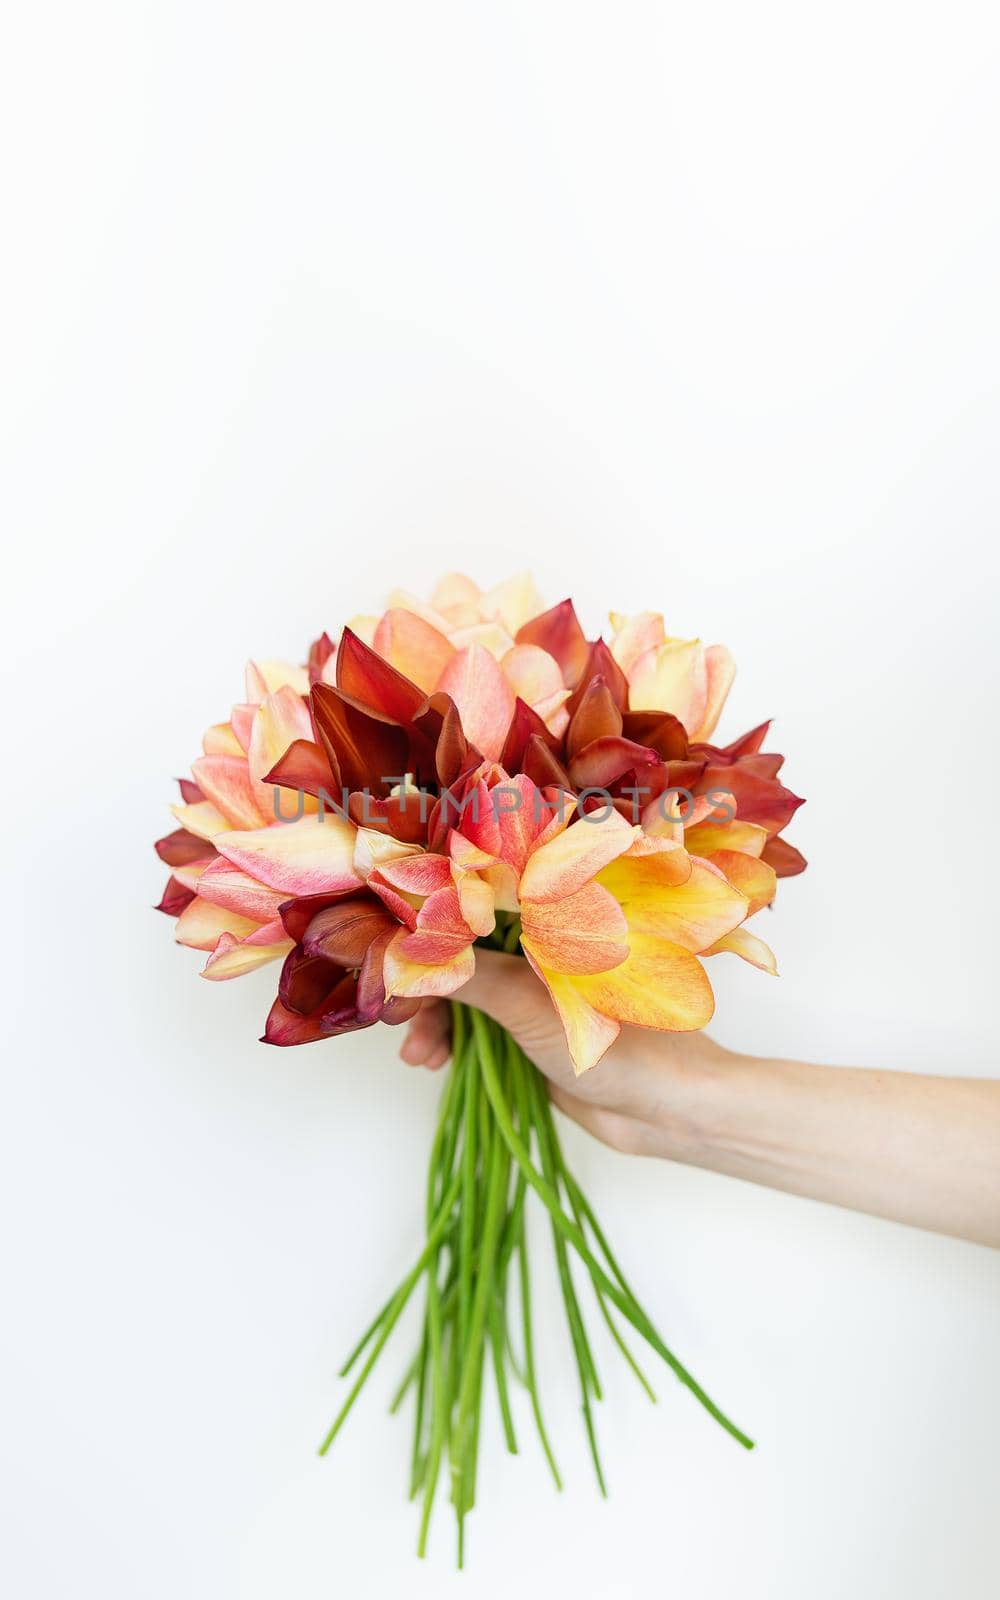 Girl holding a bouquet of fresh red-yellow tulips on a white background with copy space. Place for an inscription. by sfinks